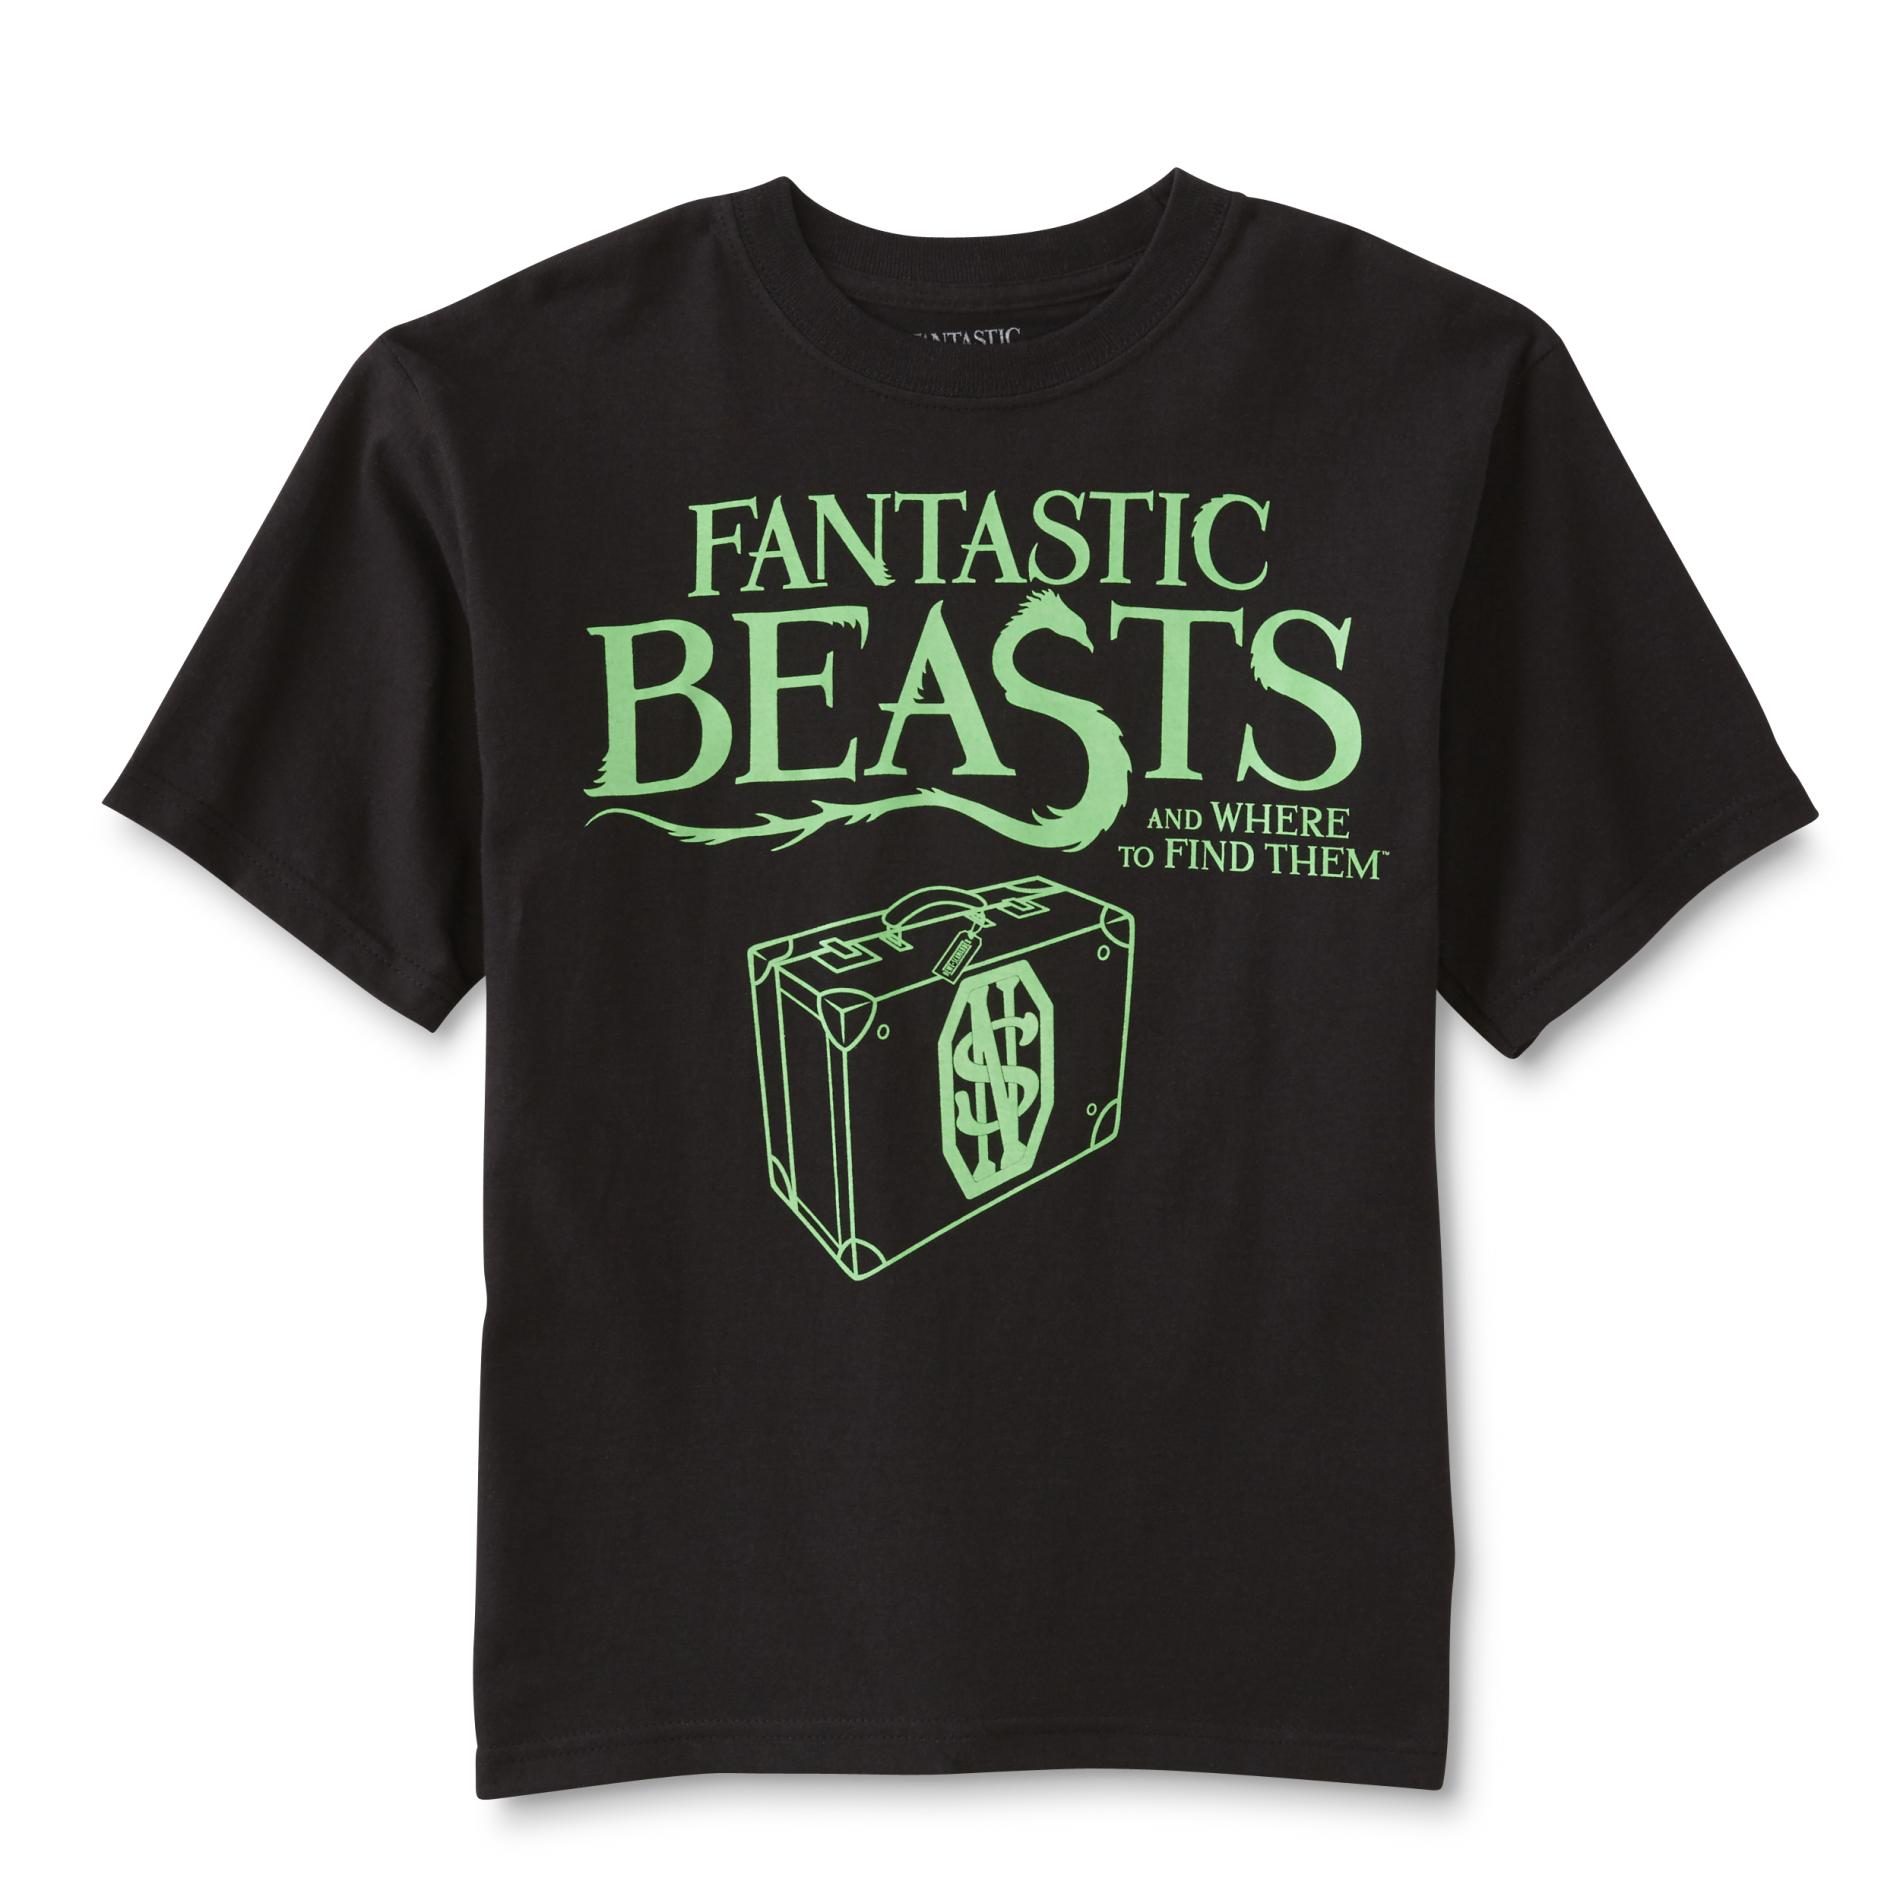 Warner Brothers Fantastic Beasts and Where to Find Them Boys' T-Shirt